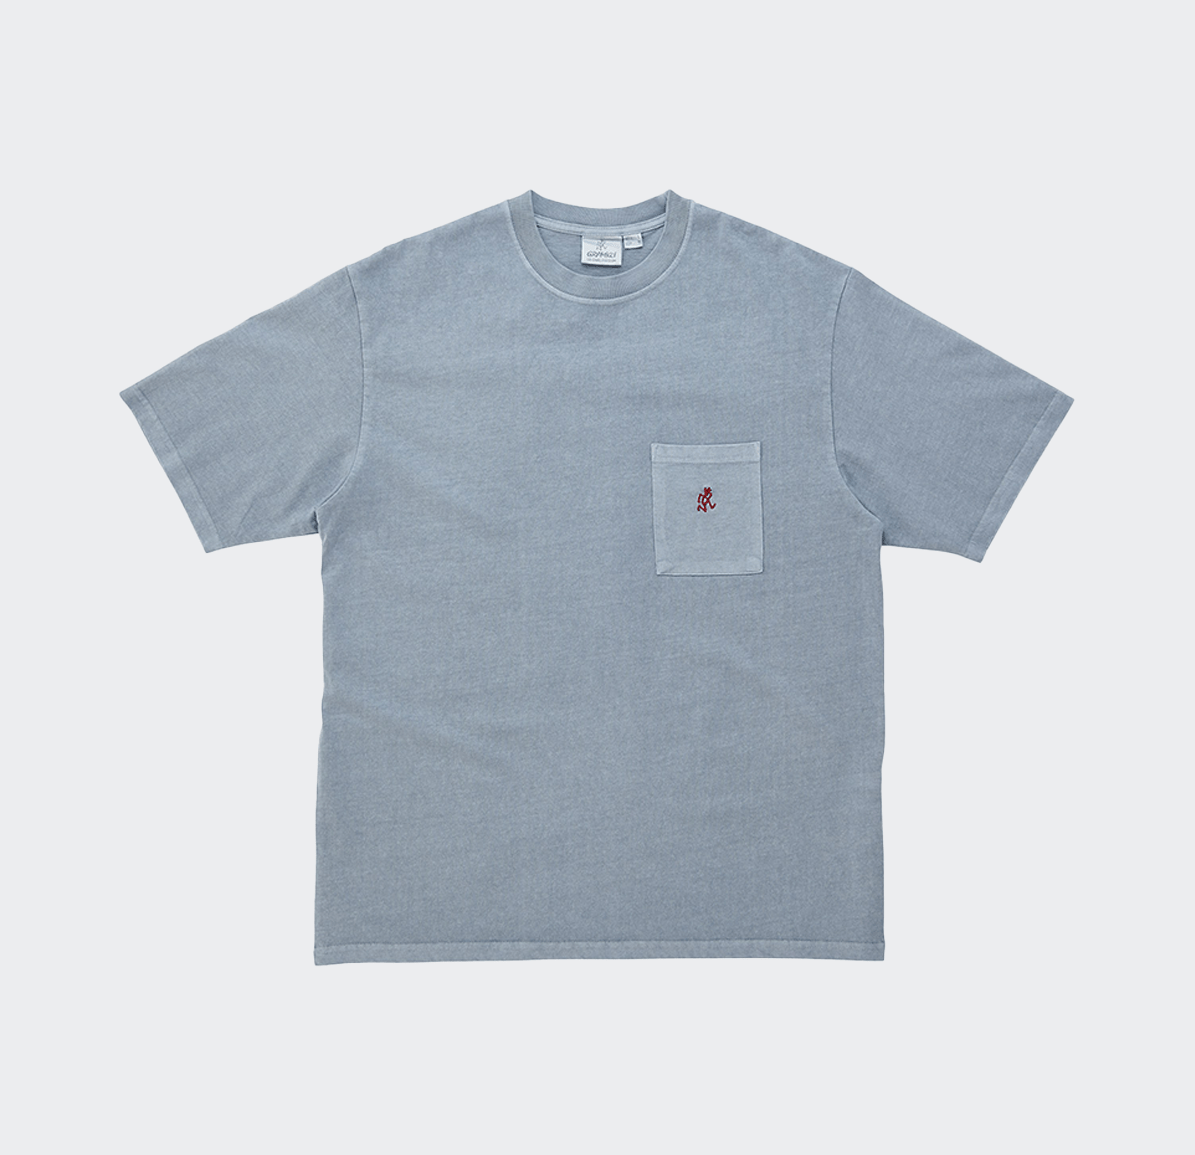 Gramicci Short Sleeve One Point Tee Shirt - Slate Pigment - Gramicci - State Of Play